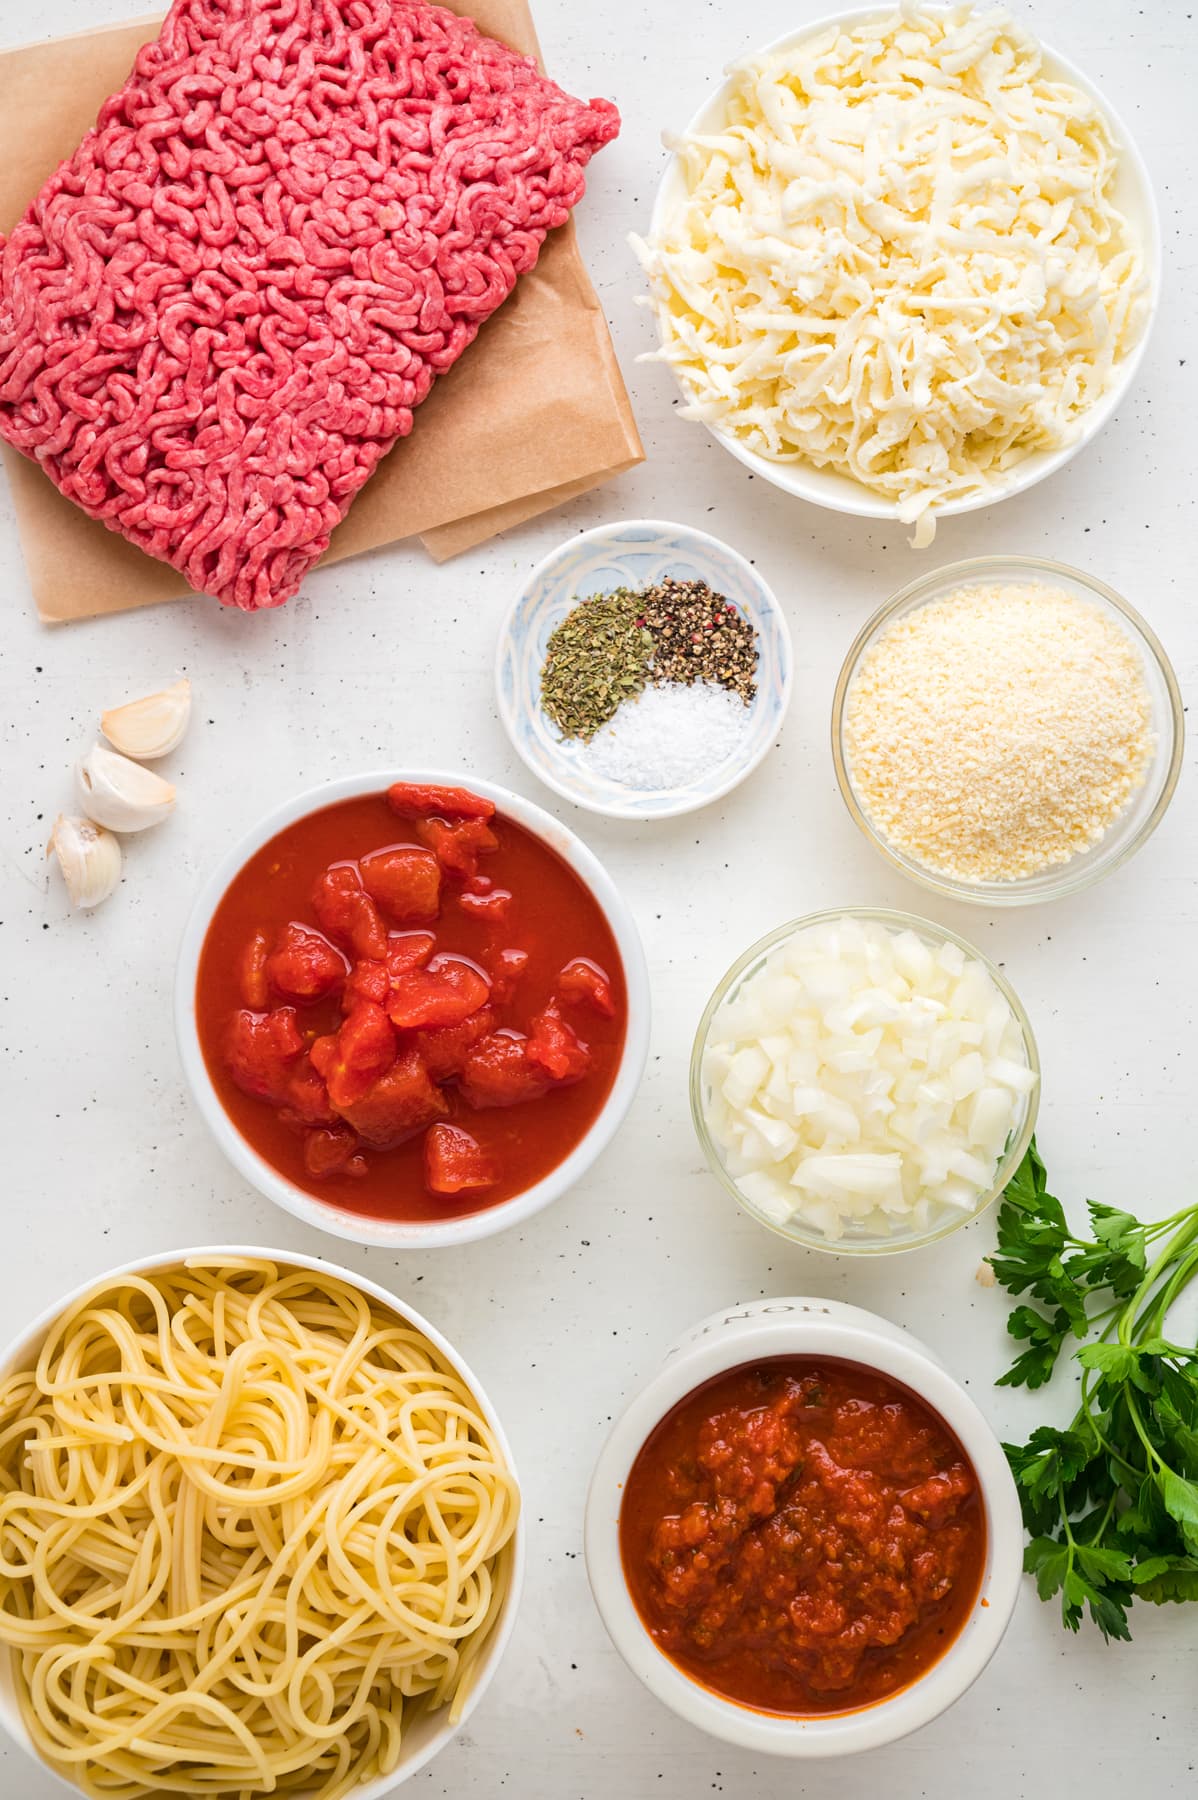 Overhead view of baked spaghetti ingredients